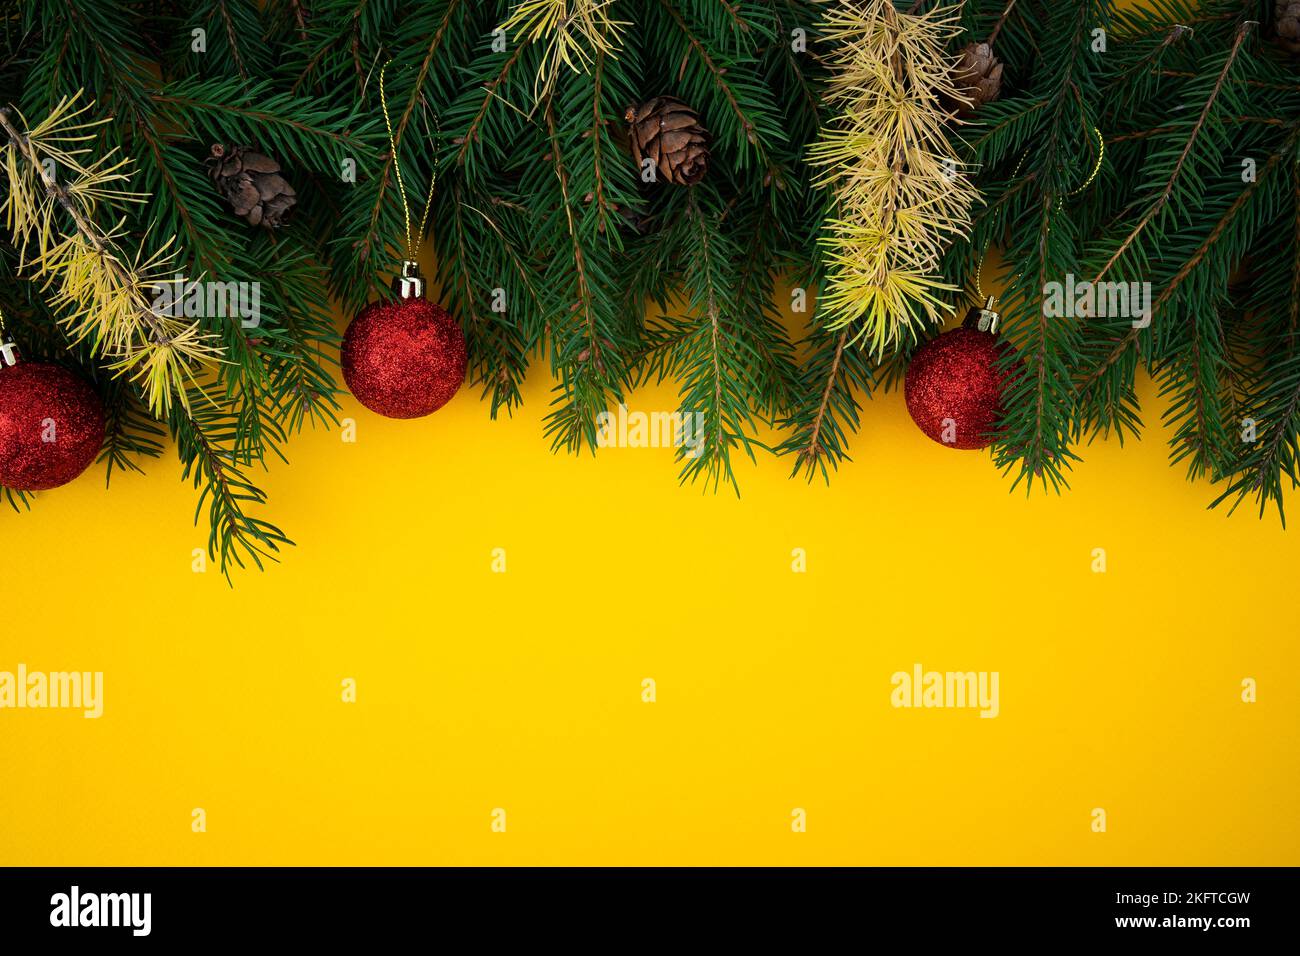 Christmas and New Year yellow background with fir border Stock Photo